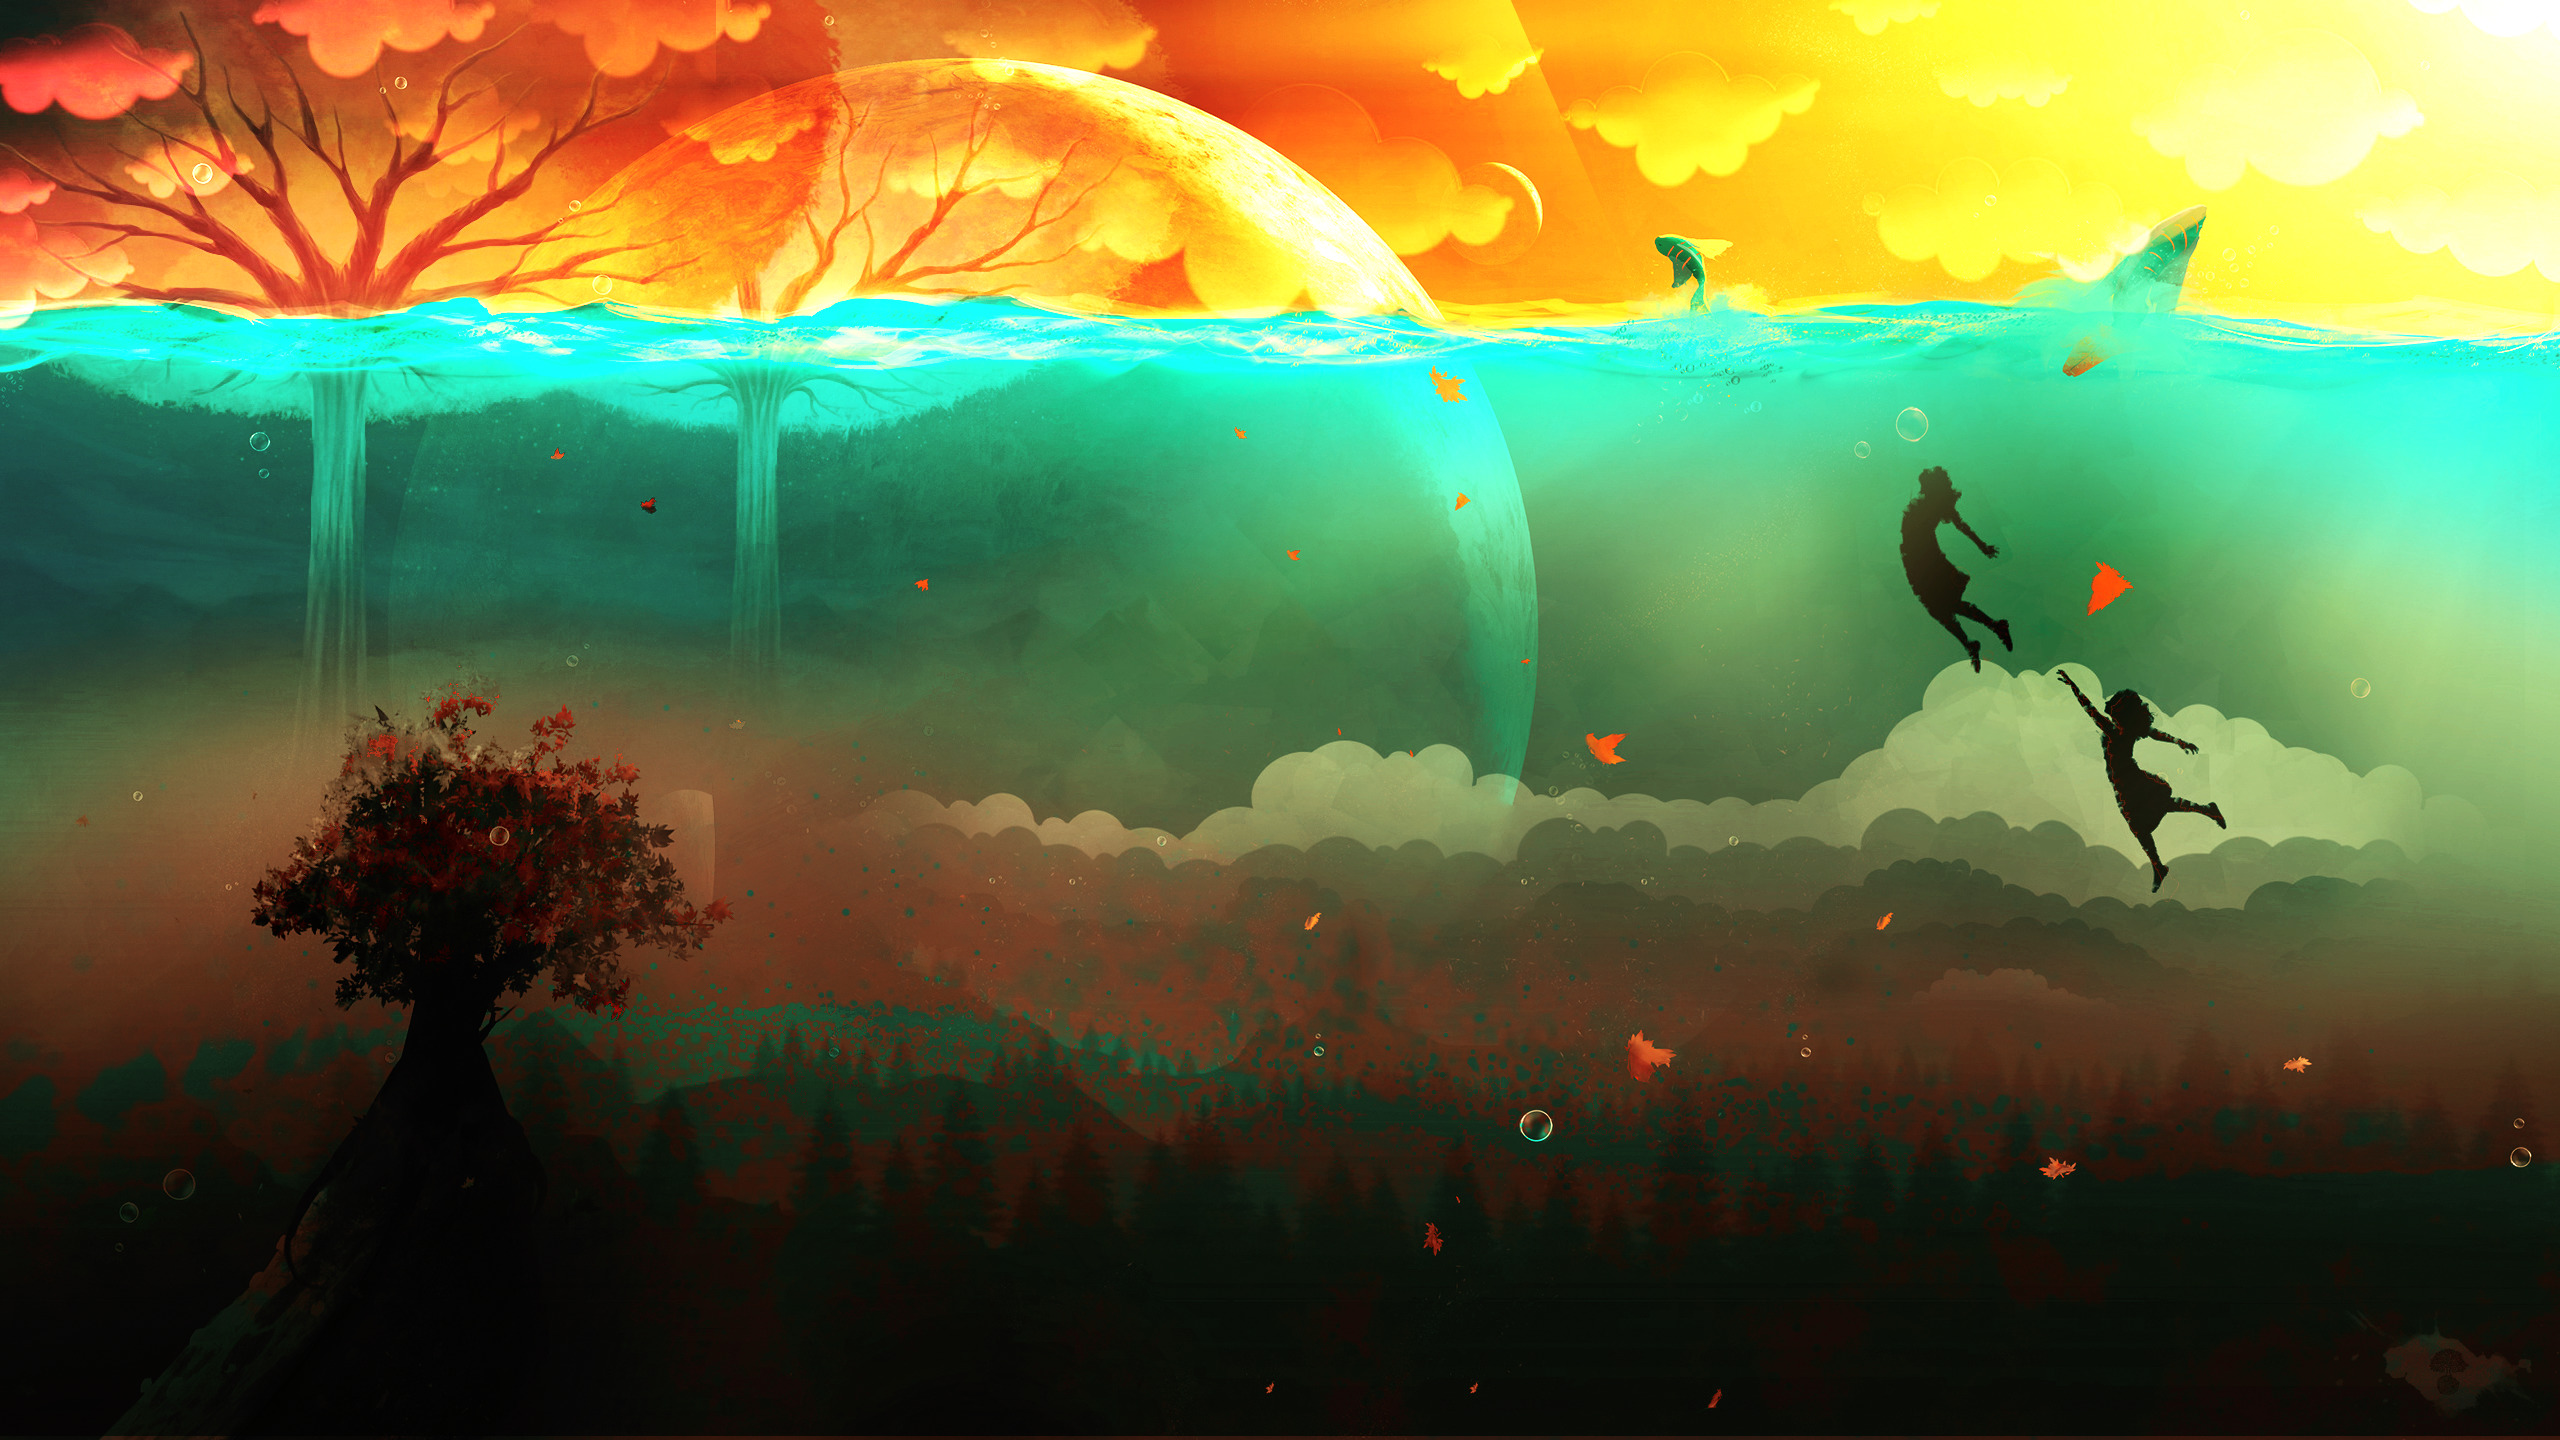 painting, Flying, Surreal, Trees, Clouds, Bubbles, Fish, Sea, Leaves, Underwater, Artwork Wallpaper